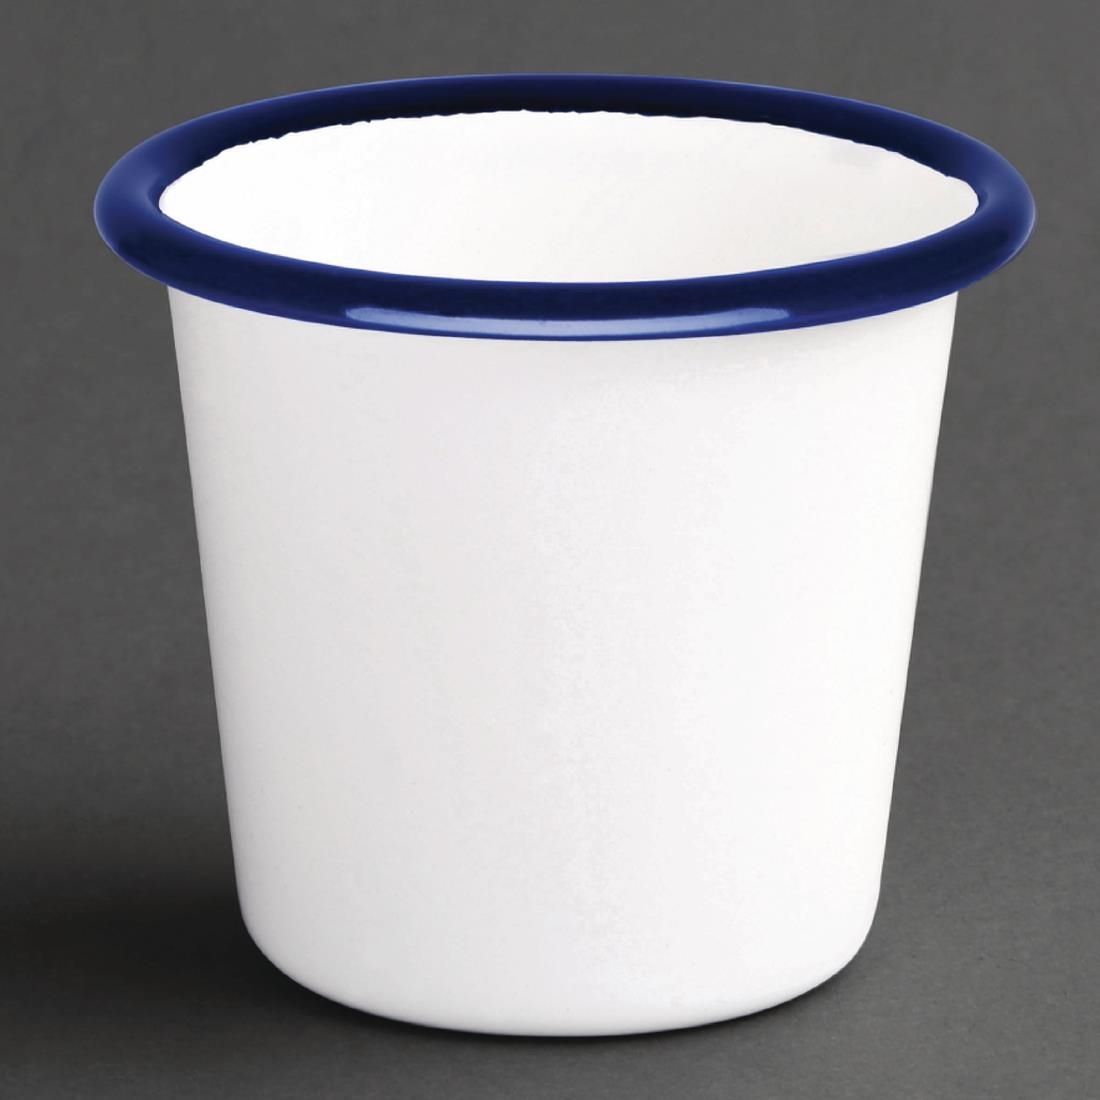 DC383 Olympia Enamel Sauce Cup White and Blue (Pack of 6) JD Catering Equipment Solutions Ltd